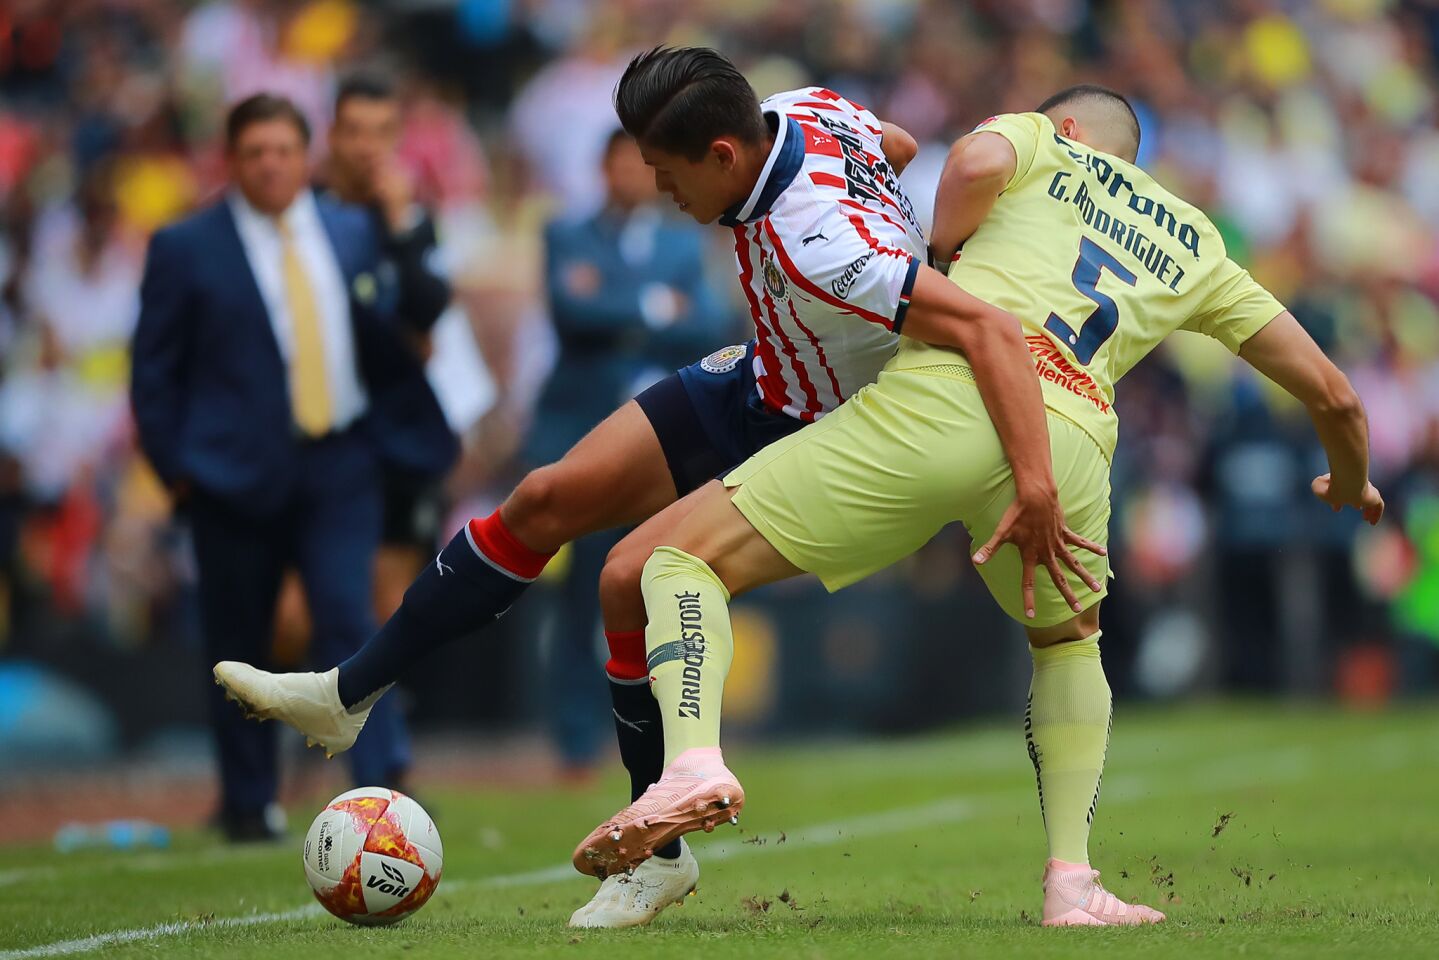 MEXICO CITY, MEXICO - SEPTEMBER 30: Jose Godinez #23 of Chivas struggles for the ball with Guido Rodriguez #5 of America during the 11th round match between America and Chivas as part of the Torneo Apertura 2018 Liga MX at Azteca Stadium on September 30, 2018 in Mexico City, Mexico.